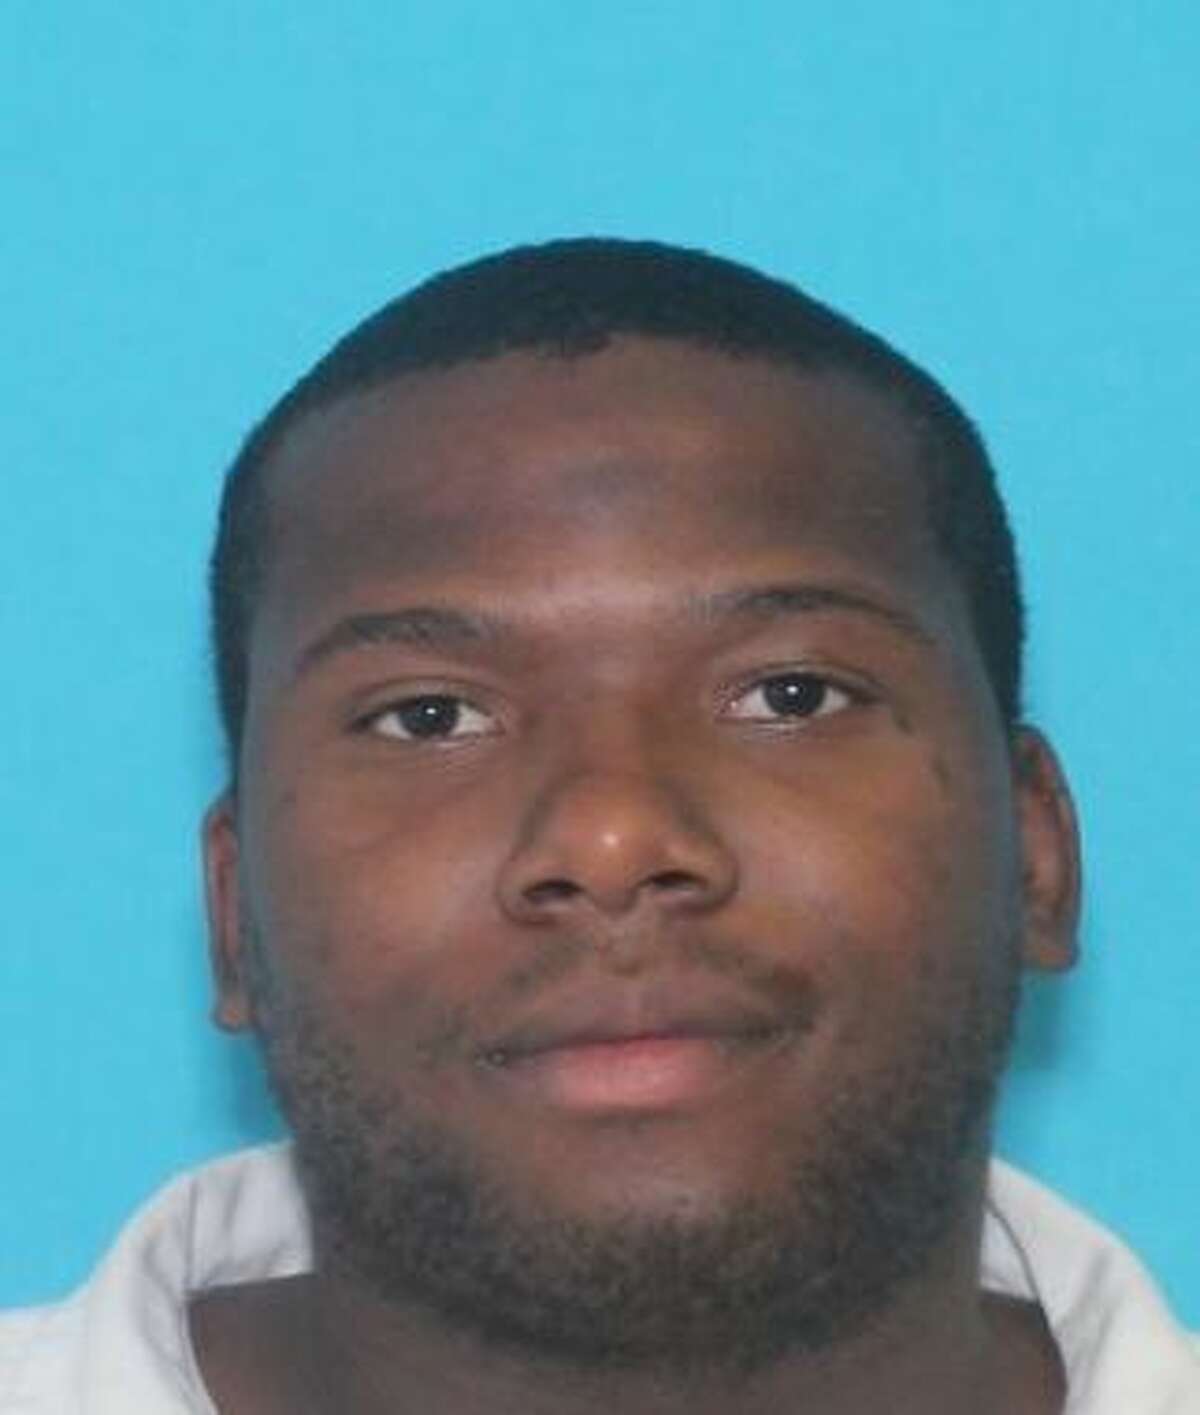 Edward Dawayne Manning of New Caney is wanted by the Montgomery County Sheriff's Office on a charge of family assault via strangulation. His warrant is active as of Nov. 1, Wednesday.